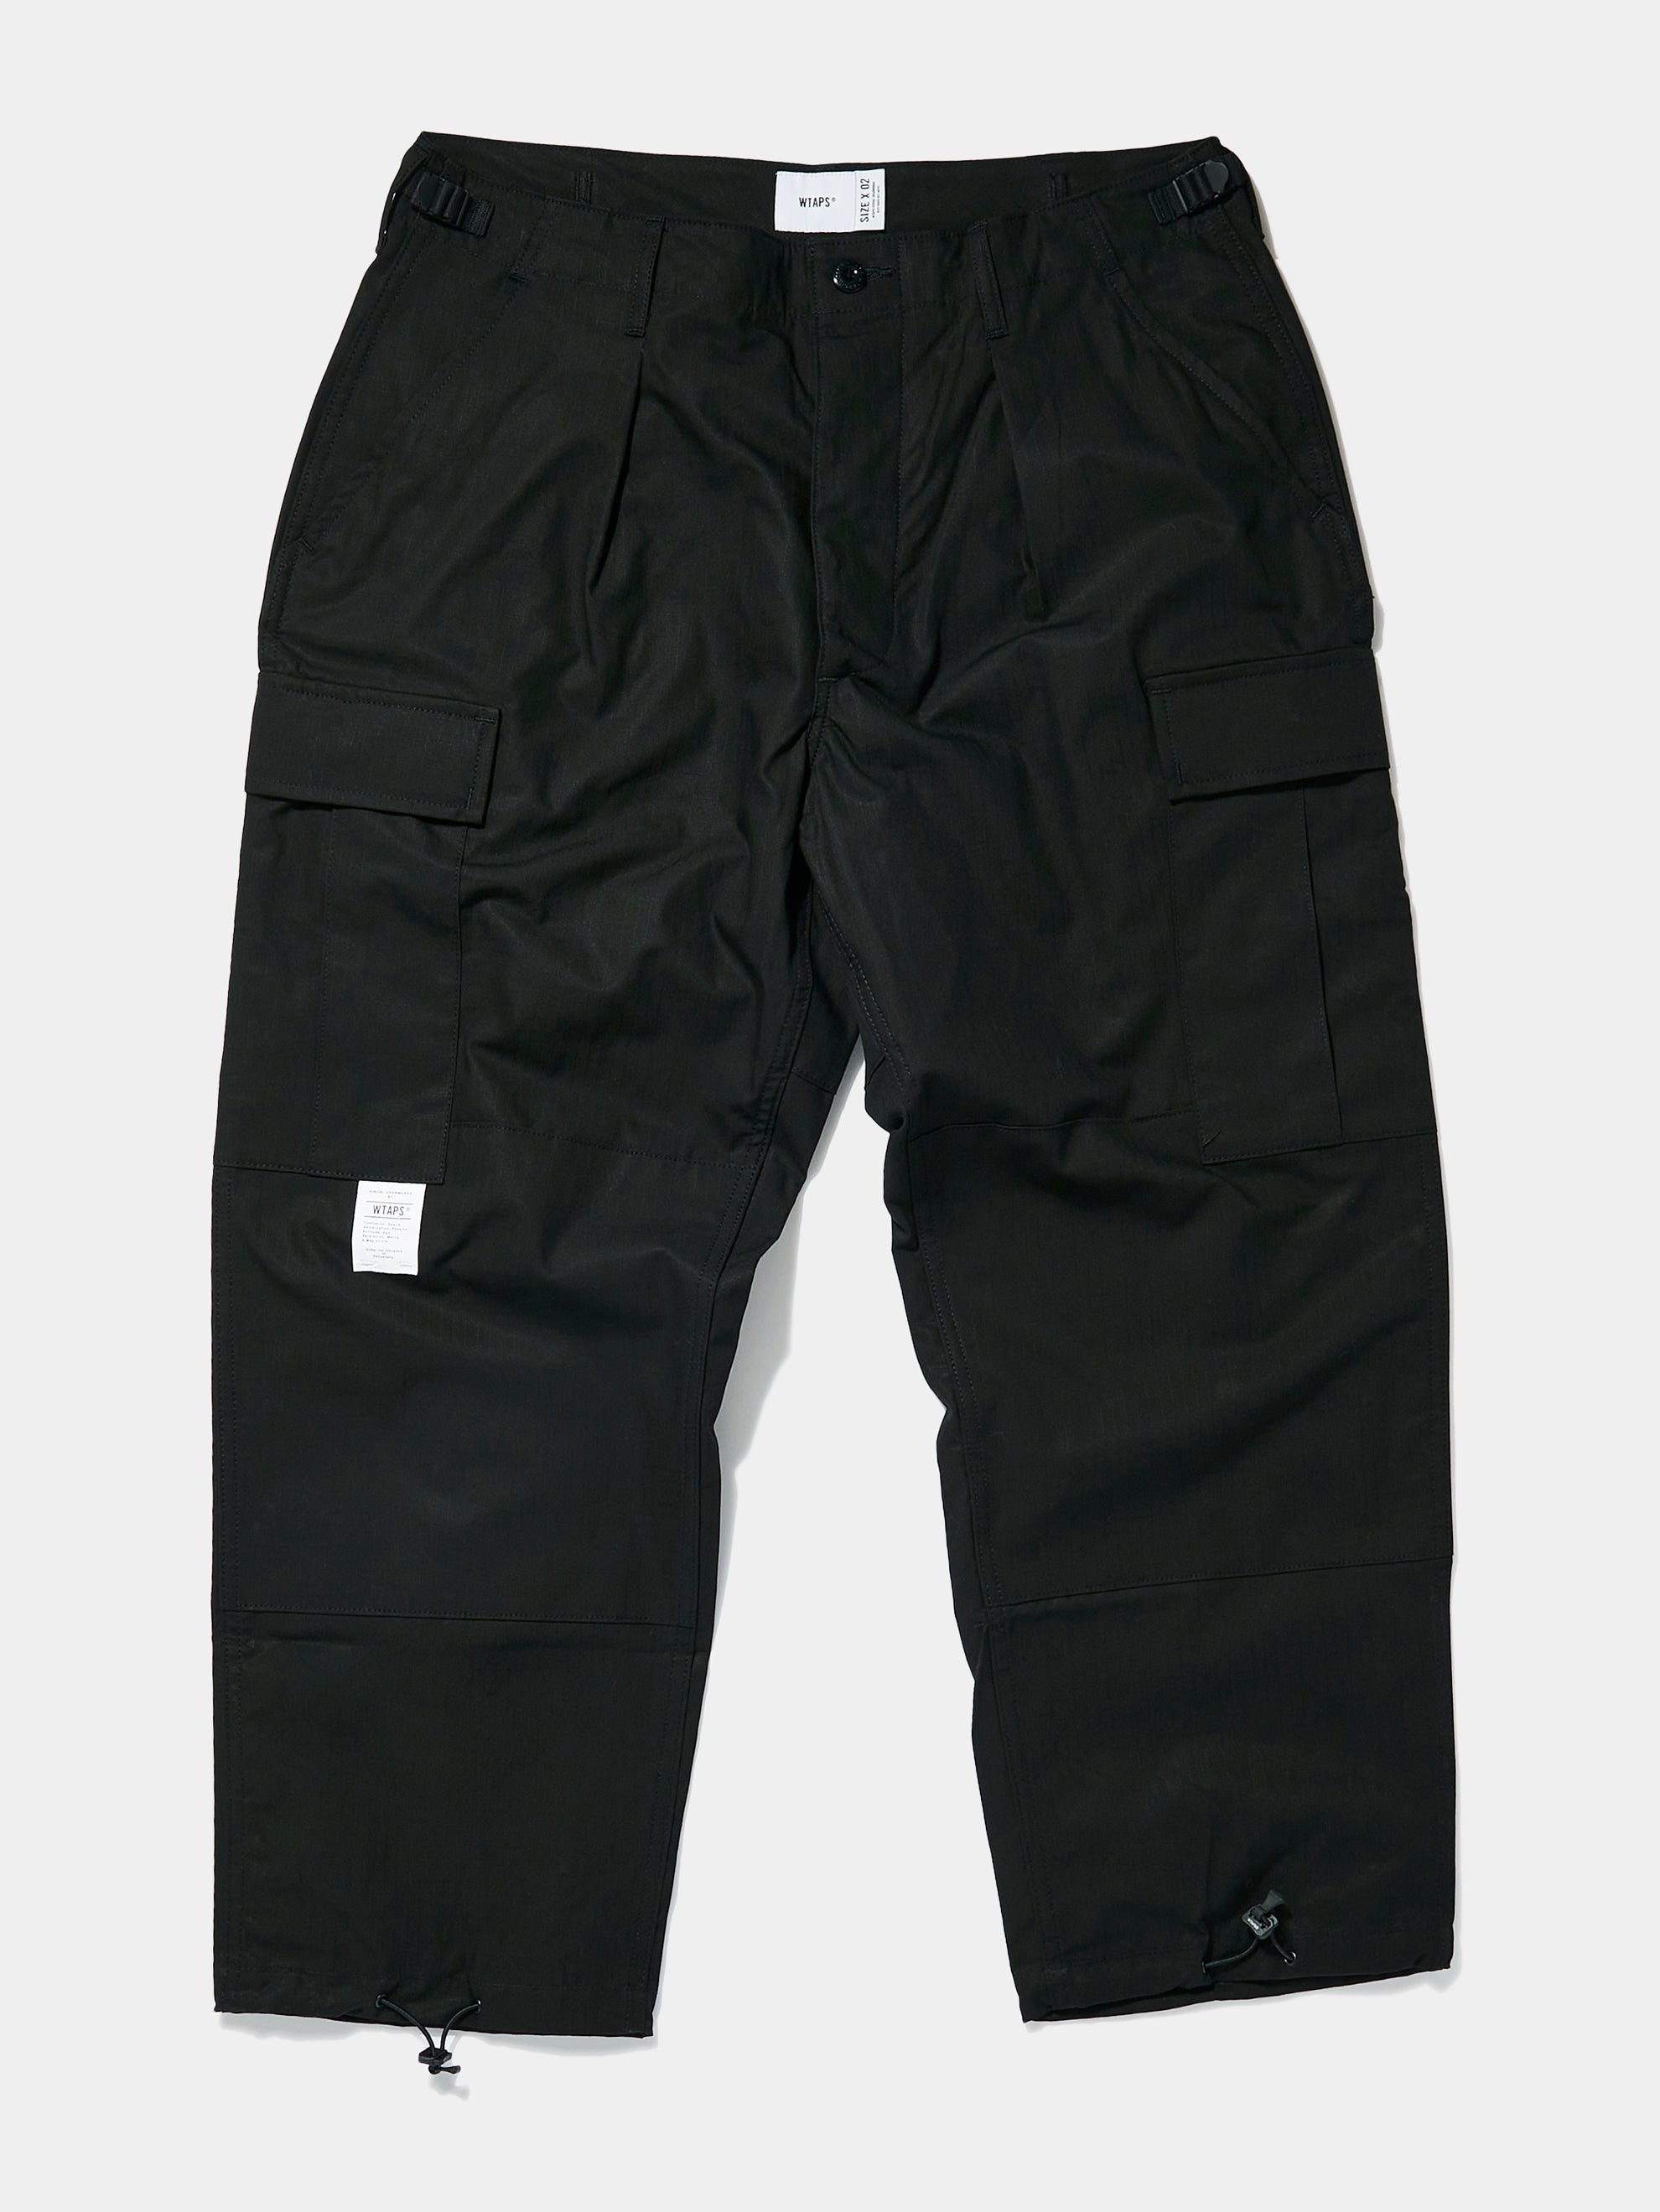 Buy Wtaps TROUSERS 15 (Black) Online at UNION LOS ANGELES